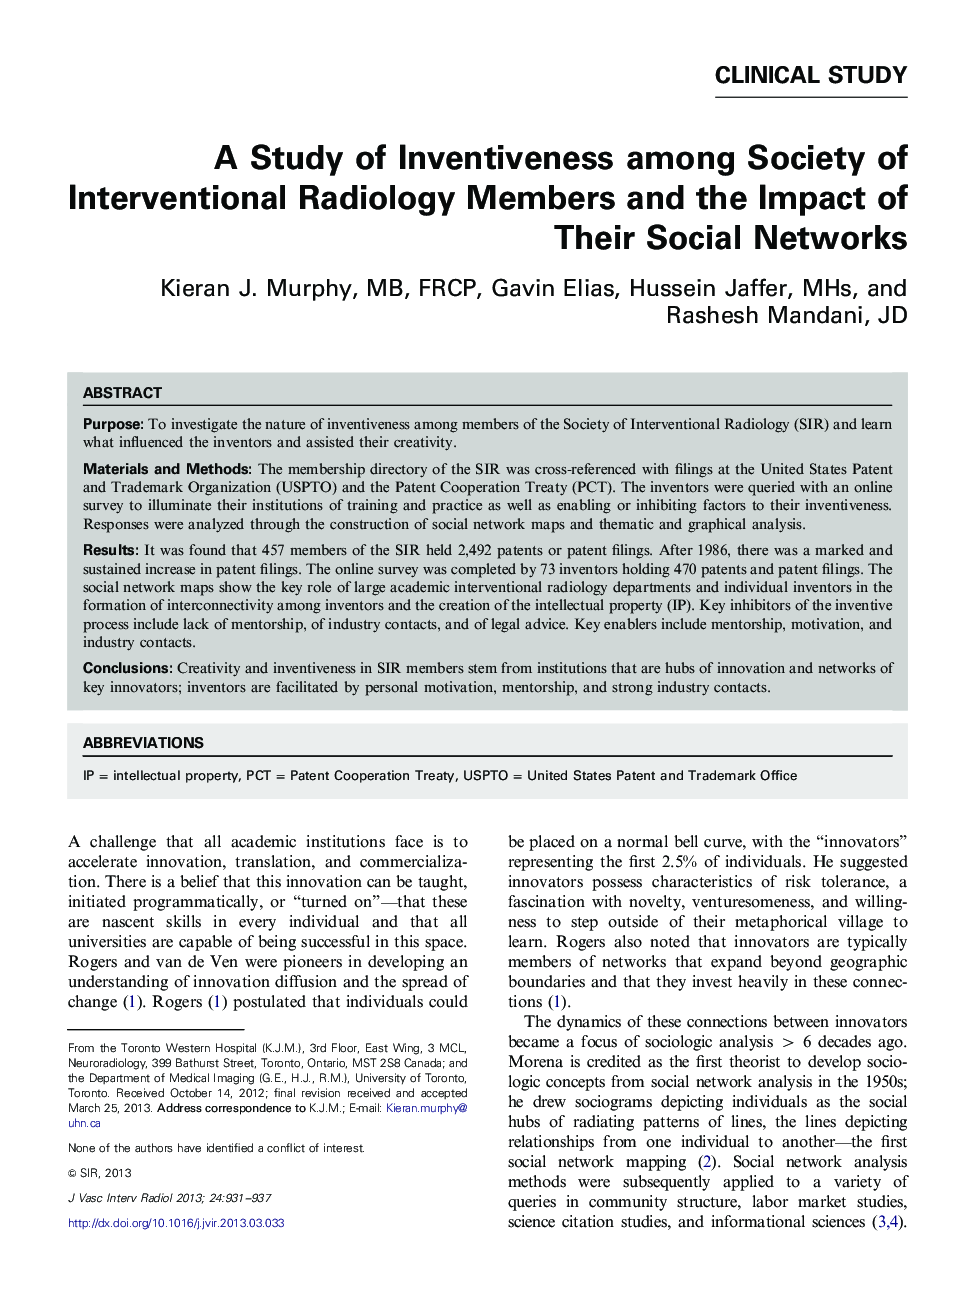 A Study of Inventiveness among Society of Interventional Radiology Members and the Impact of Their Social Networks